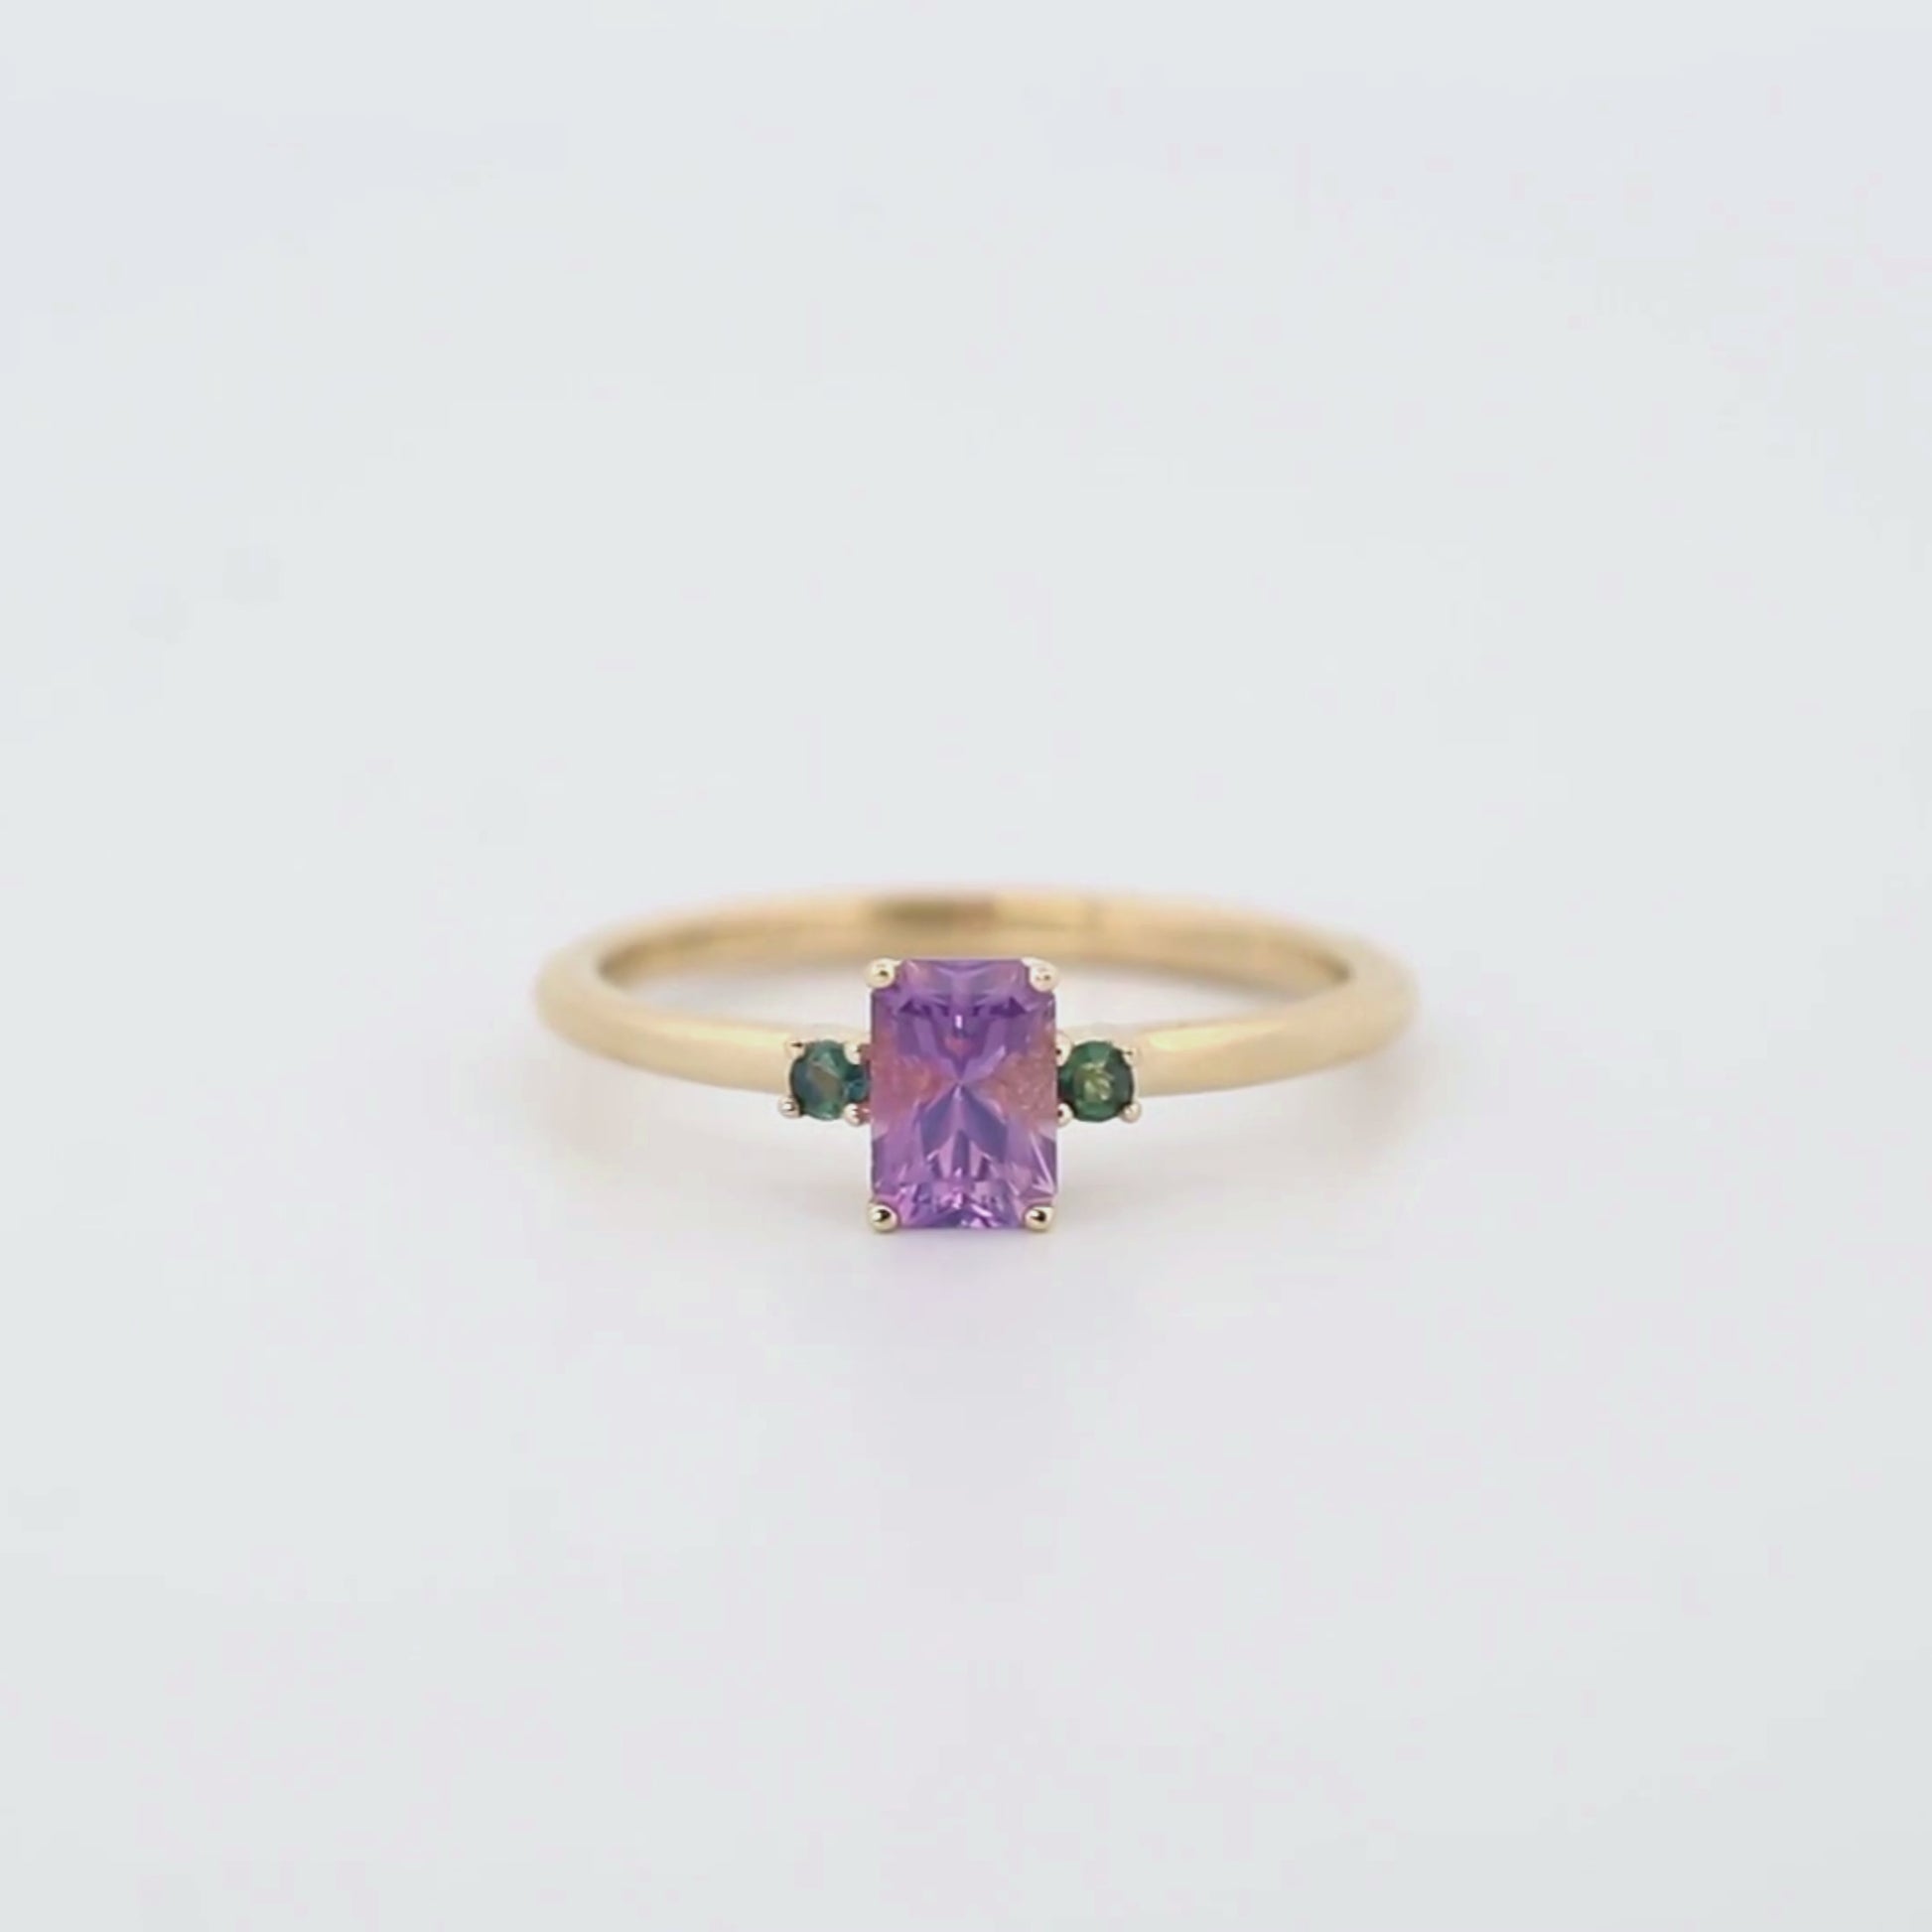 Terra Ring with a 0.81 Carat Radiant Cut Purple Sapphire and Teal Sapphire Accents in 14k Yellow Gold - Ready to Size and Ship